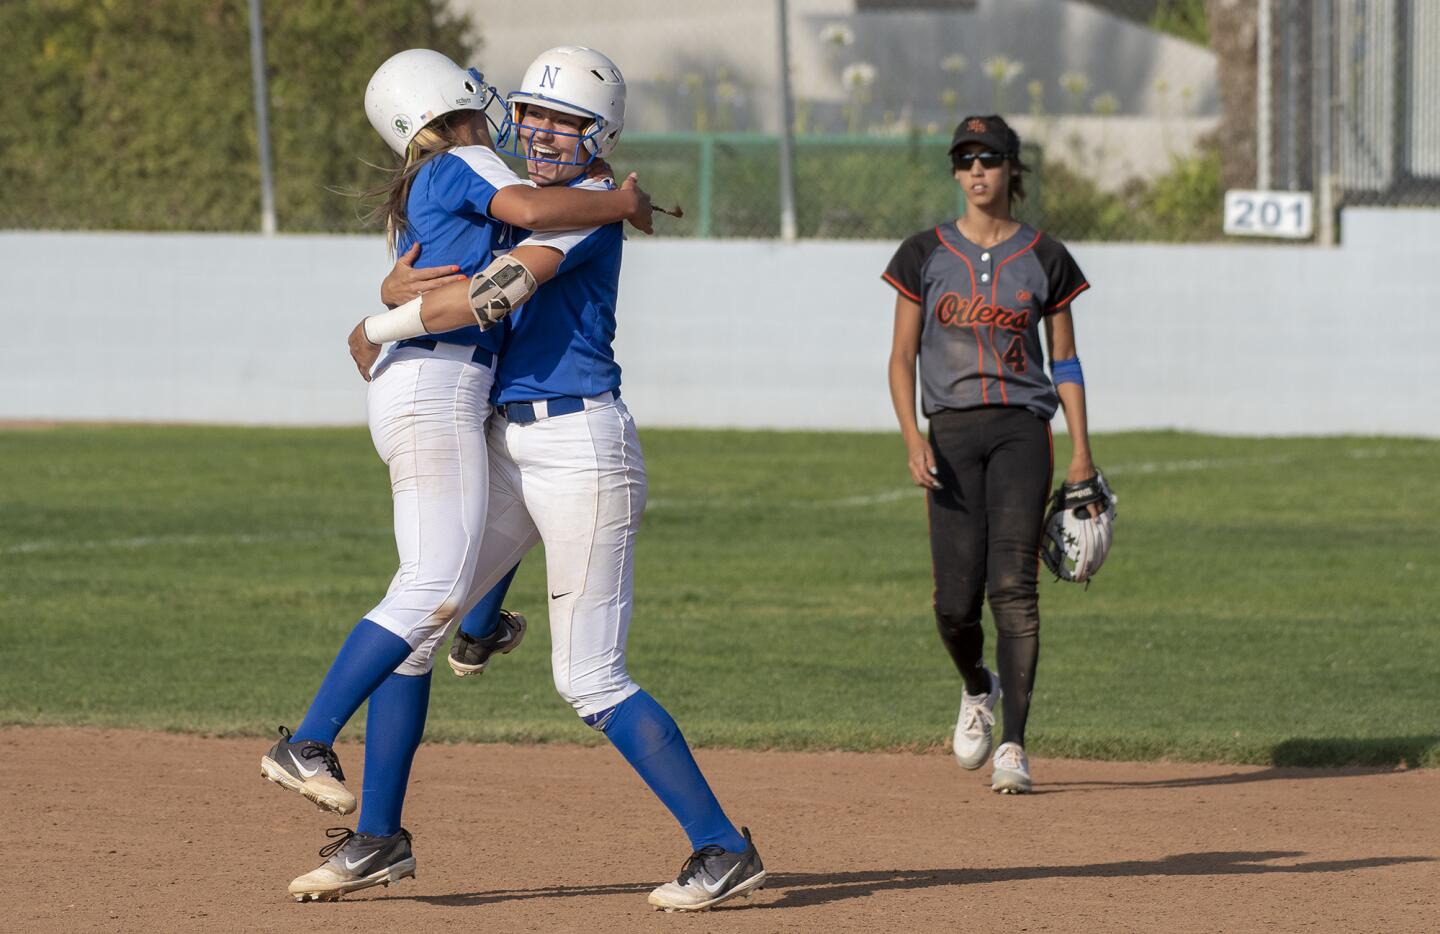 Norco's Mikayla Allee, left, jumps into the arms of Kinzie Hansen after she hit a walk off double in the ninth inning as Huntington Beach's Shelbi Ortiz walks off the field during a quarterfinal CIF Southern Section Division 1 playoff game on Thursday, May 24.